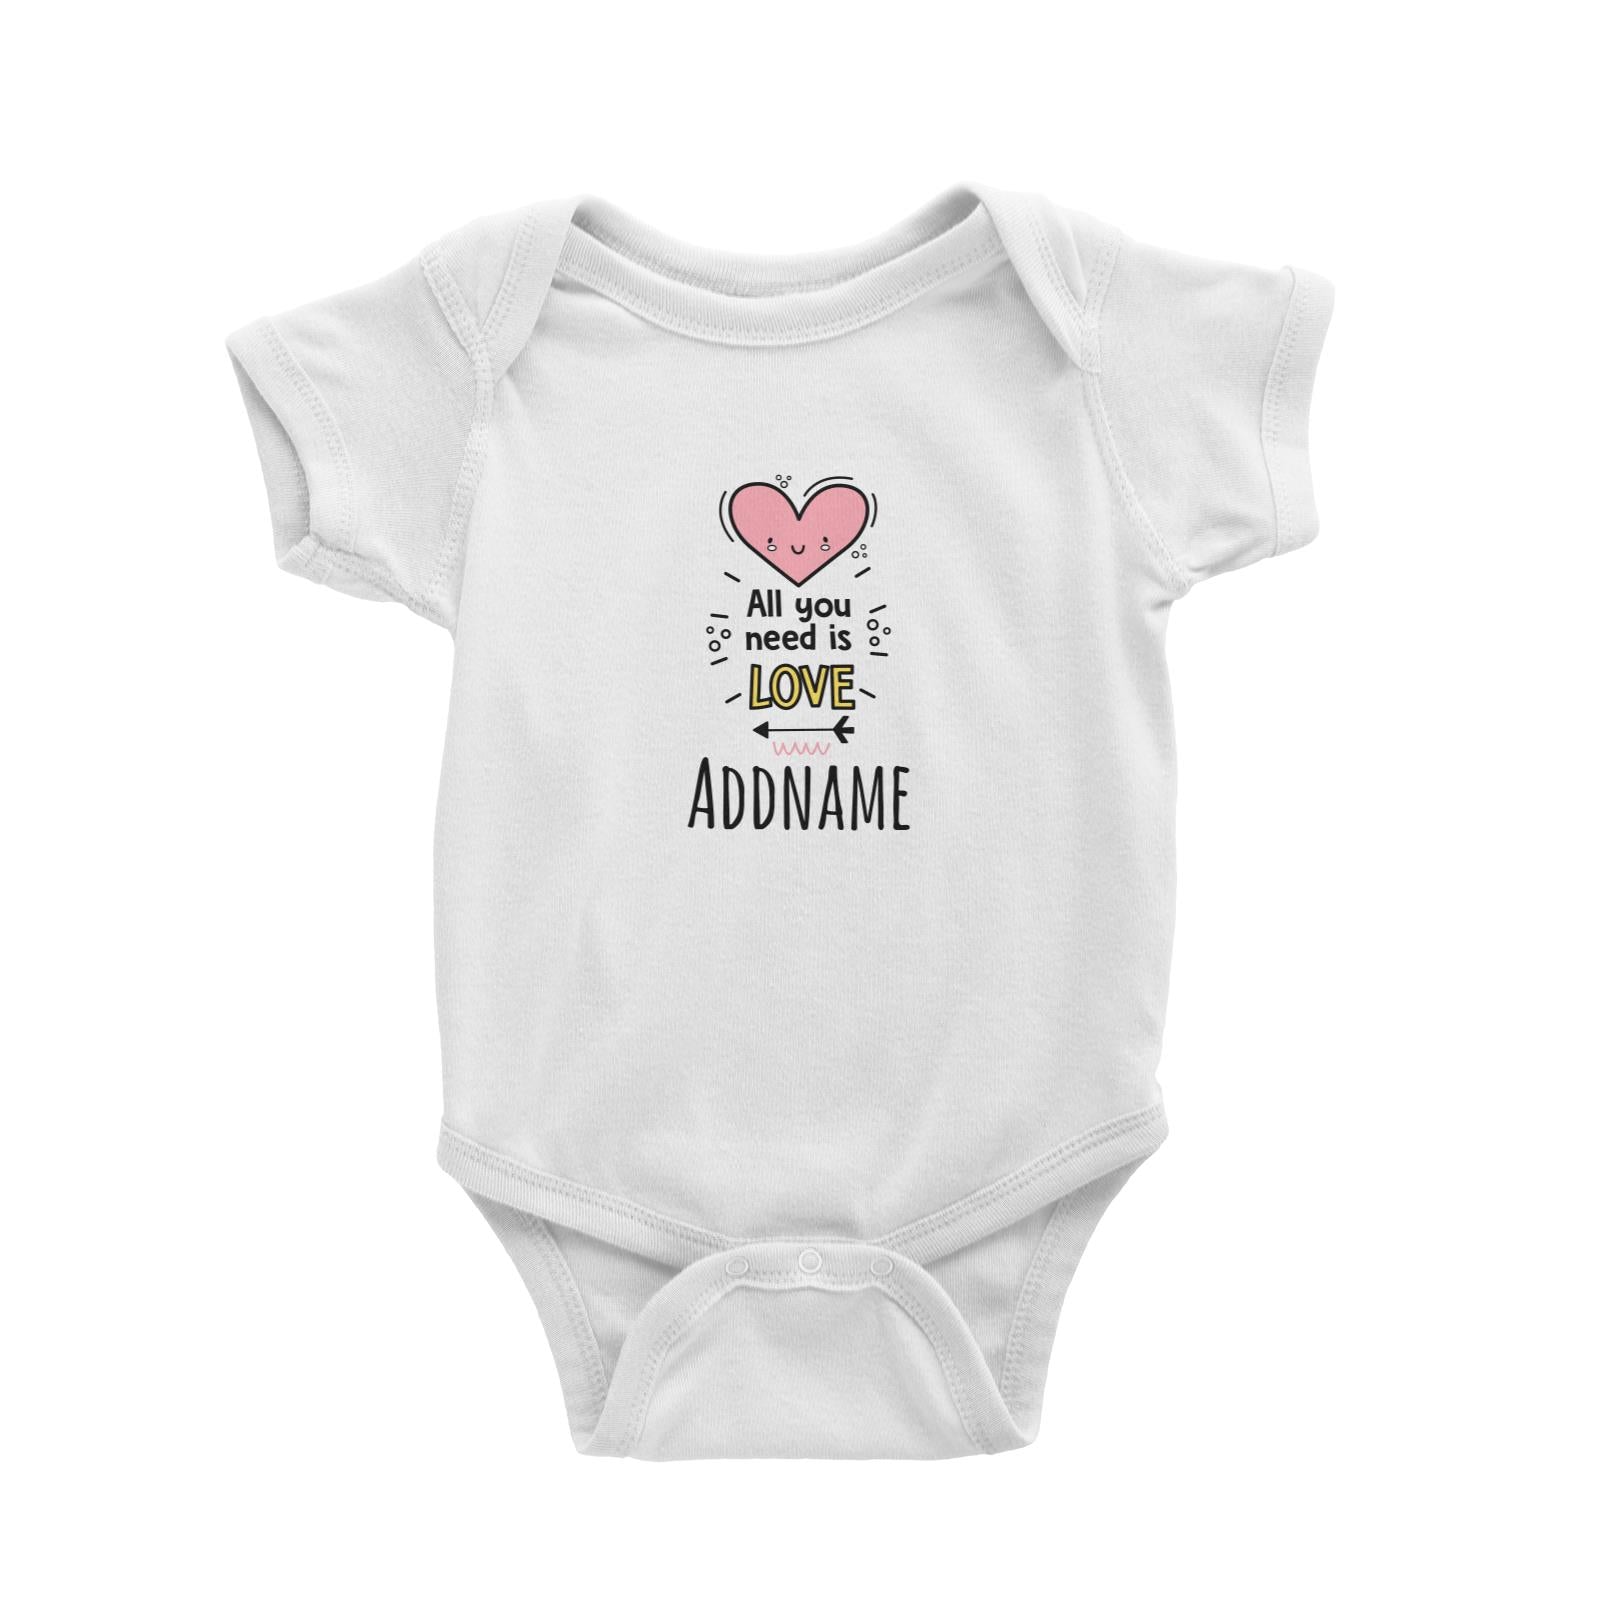 Drawn Baby Elements All You Need Is Love Addname Baby Romper